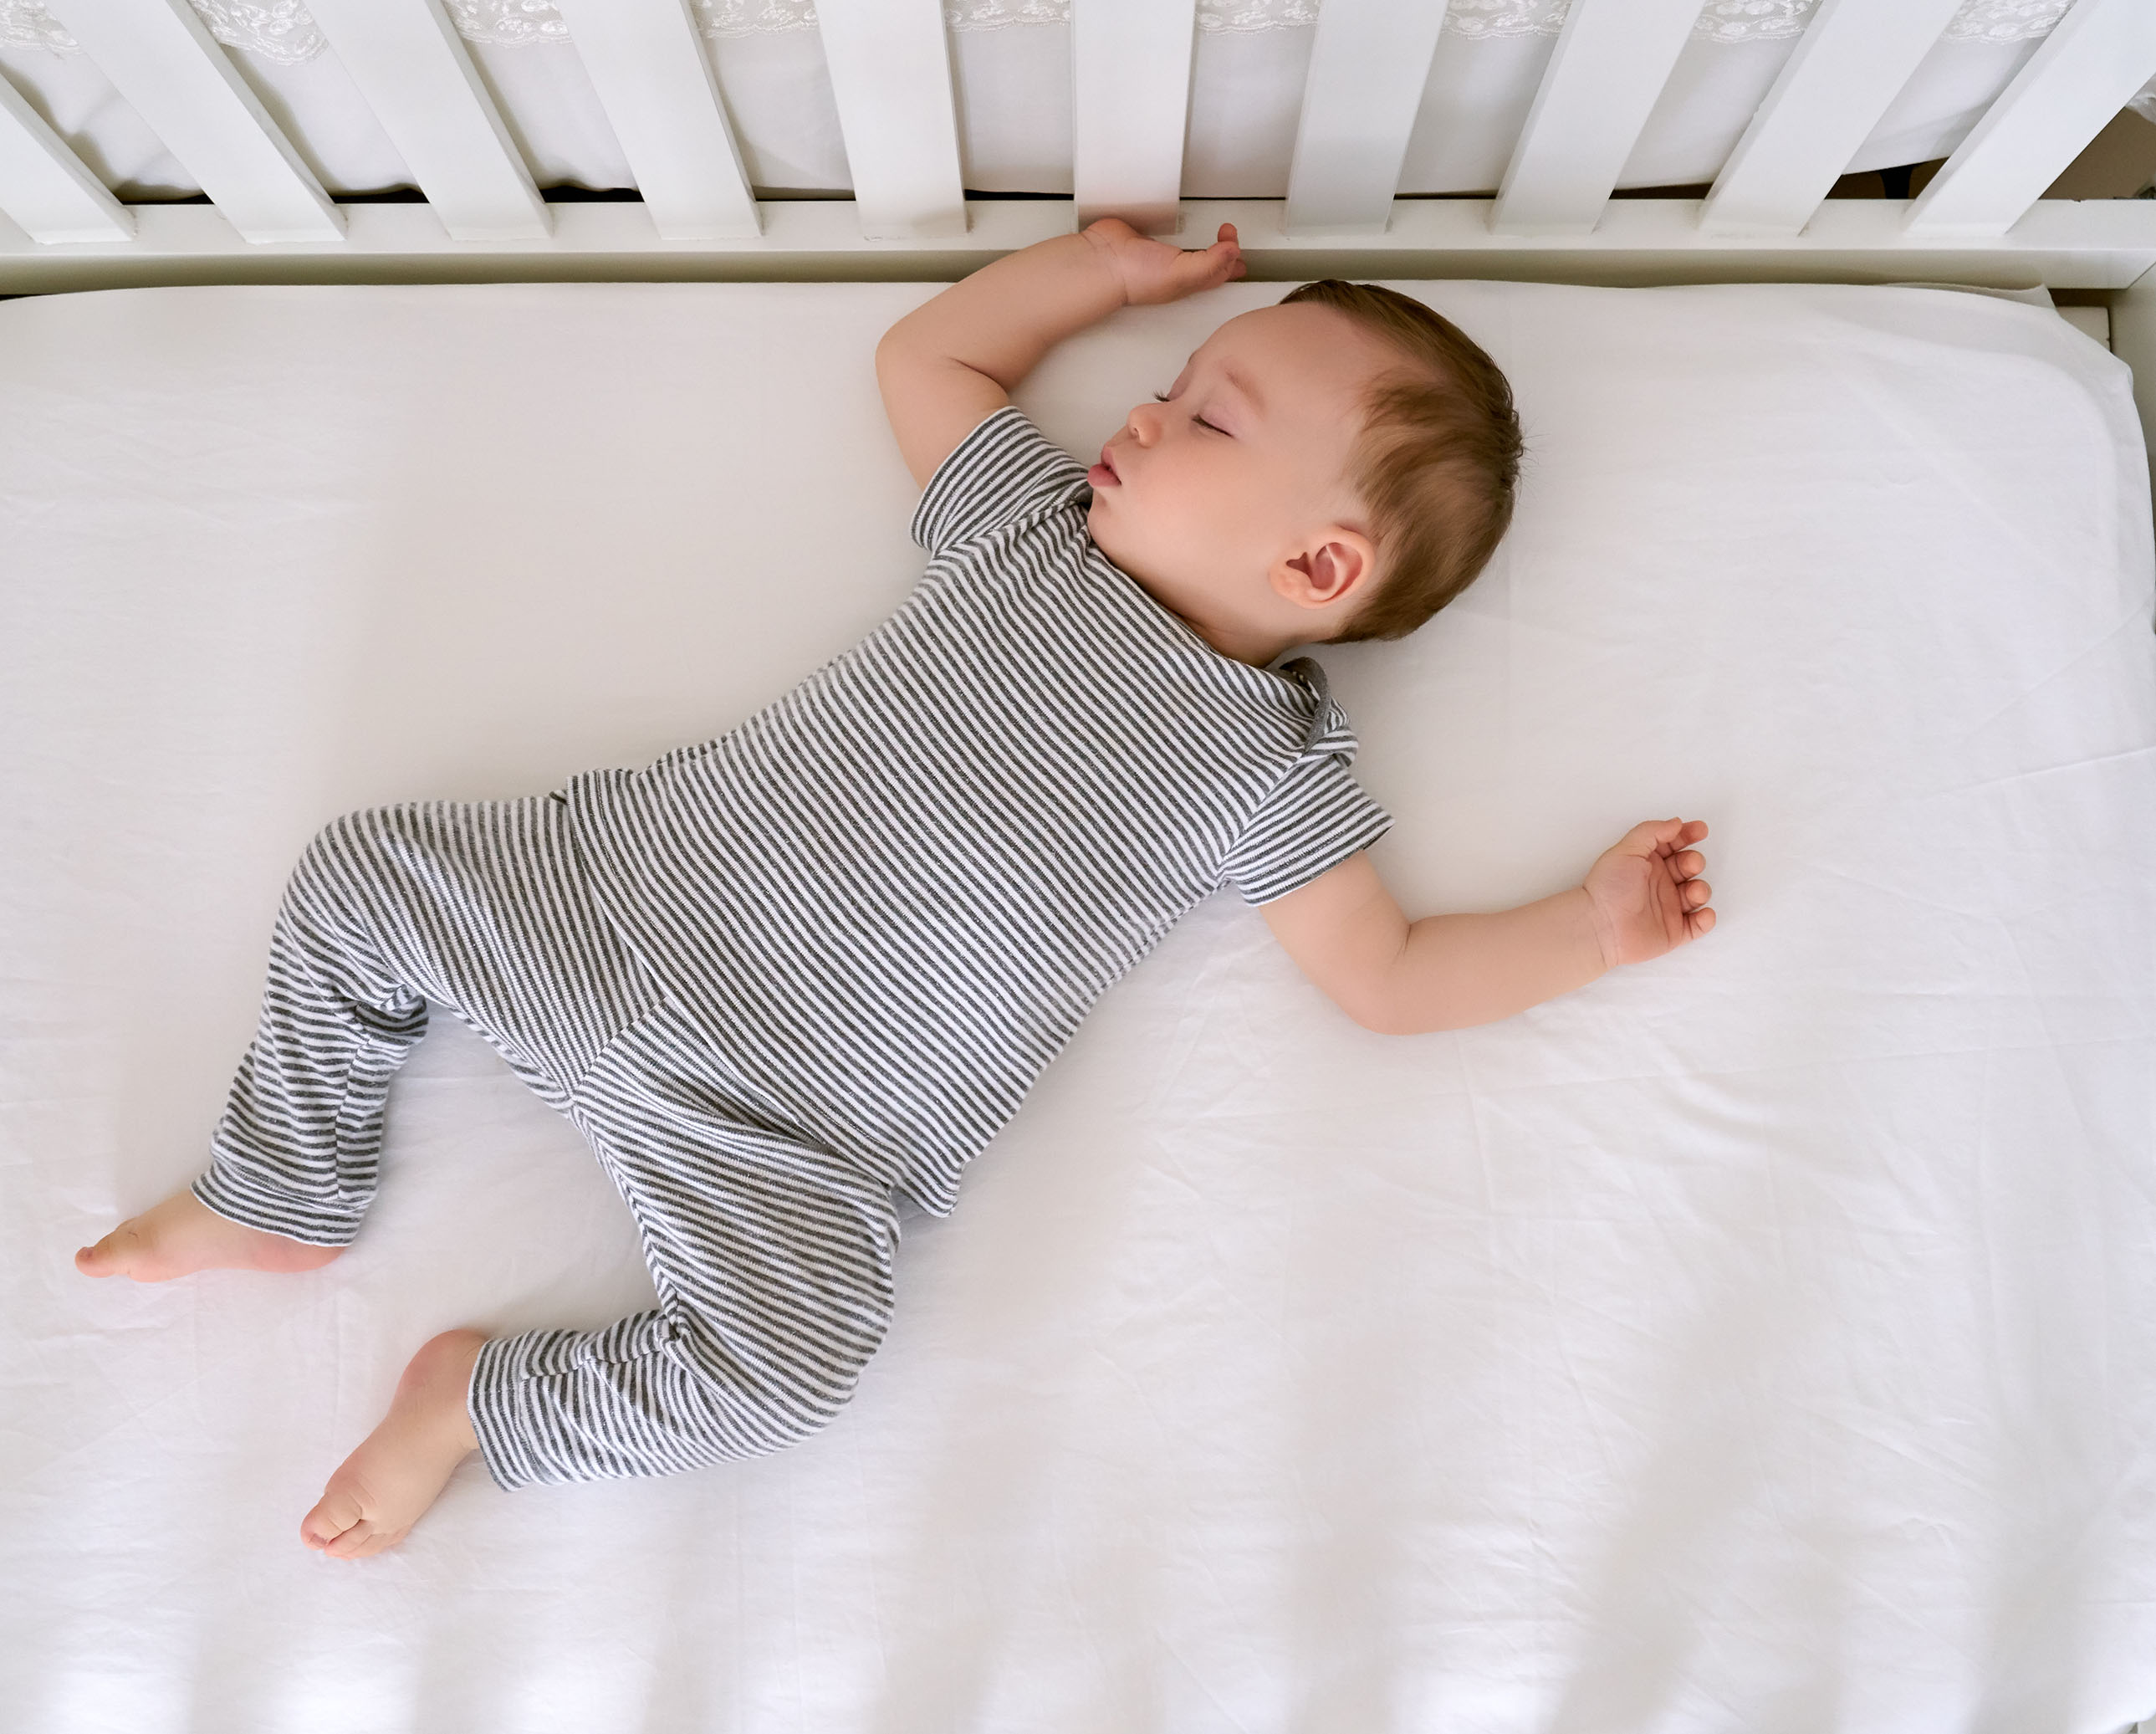 An infant sleeping on his back in a crib